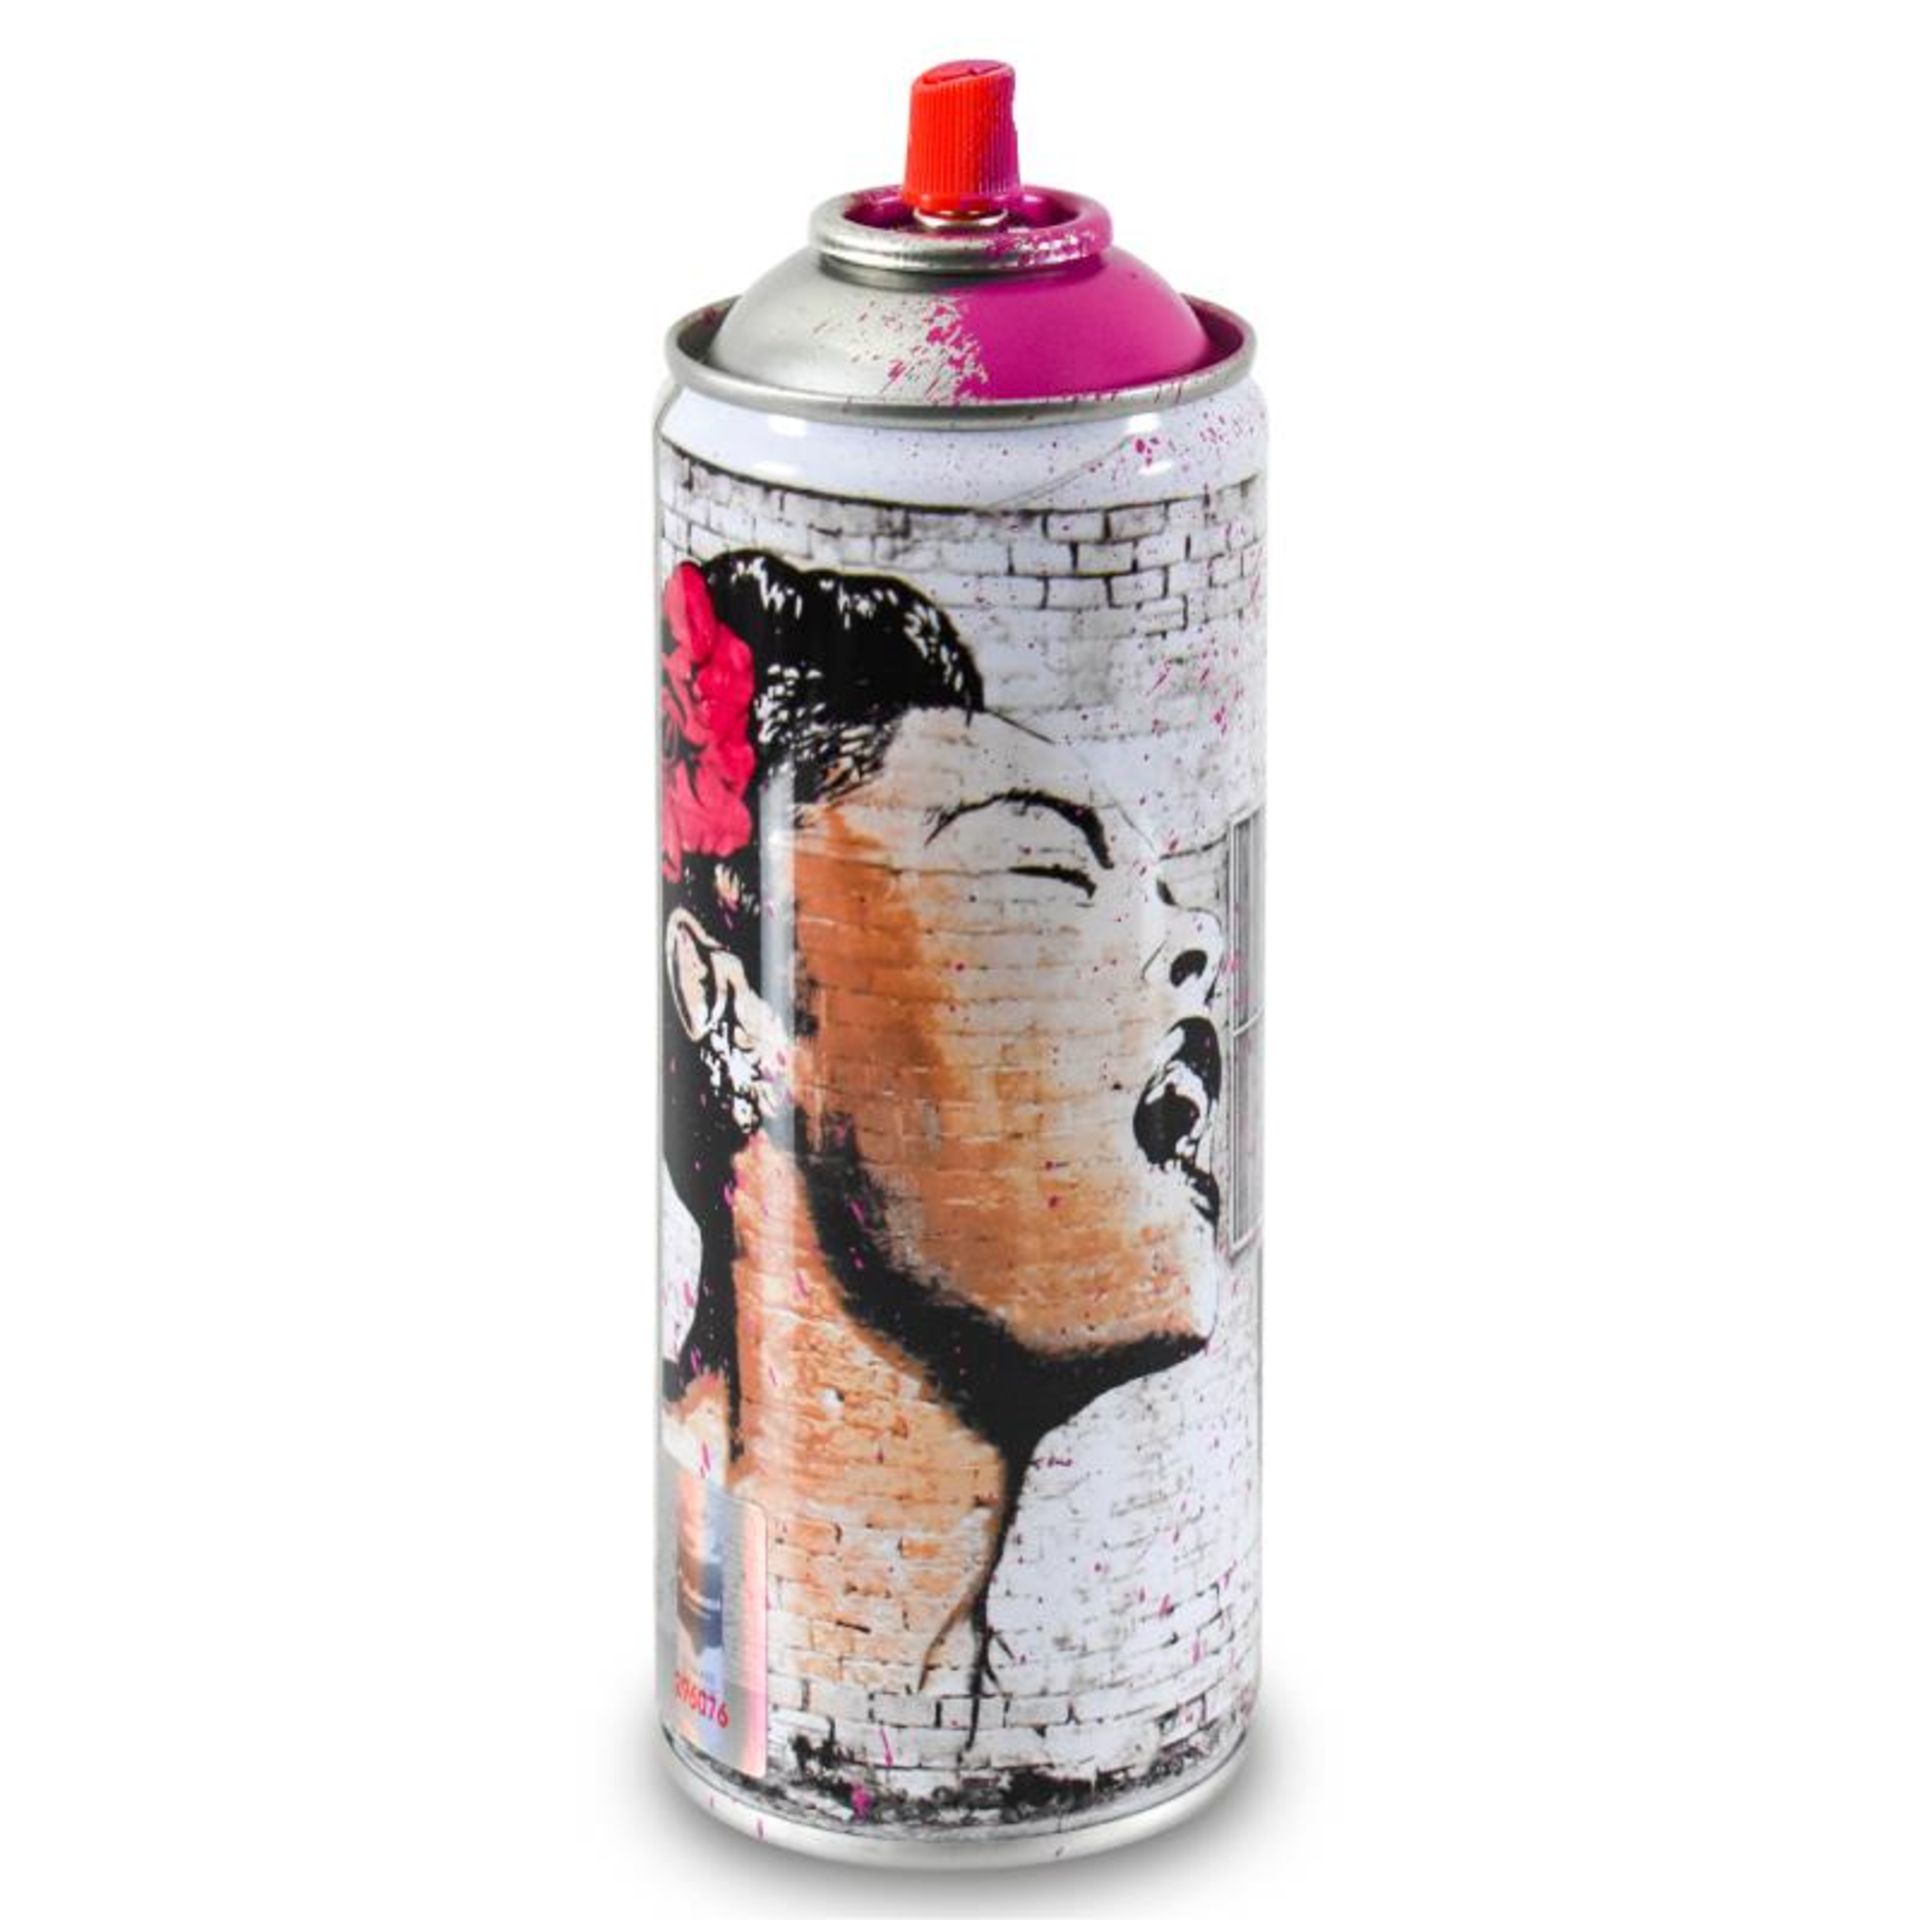 Life is Beautiful (Pink) by Mr Brainwash - Image 2 of 3